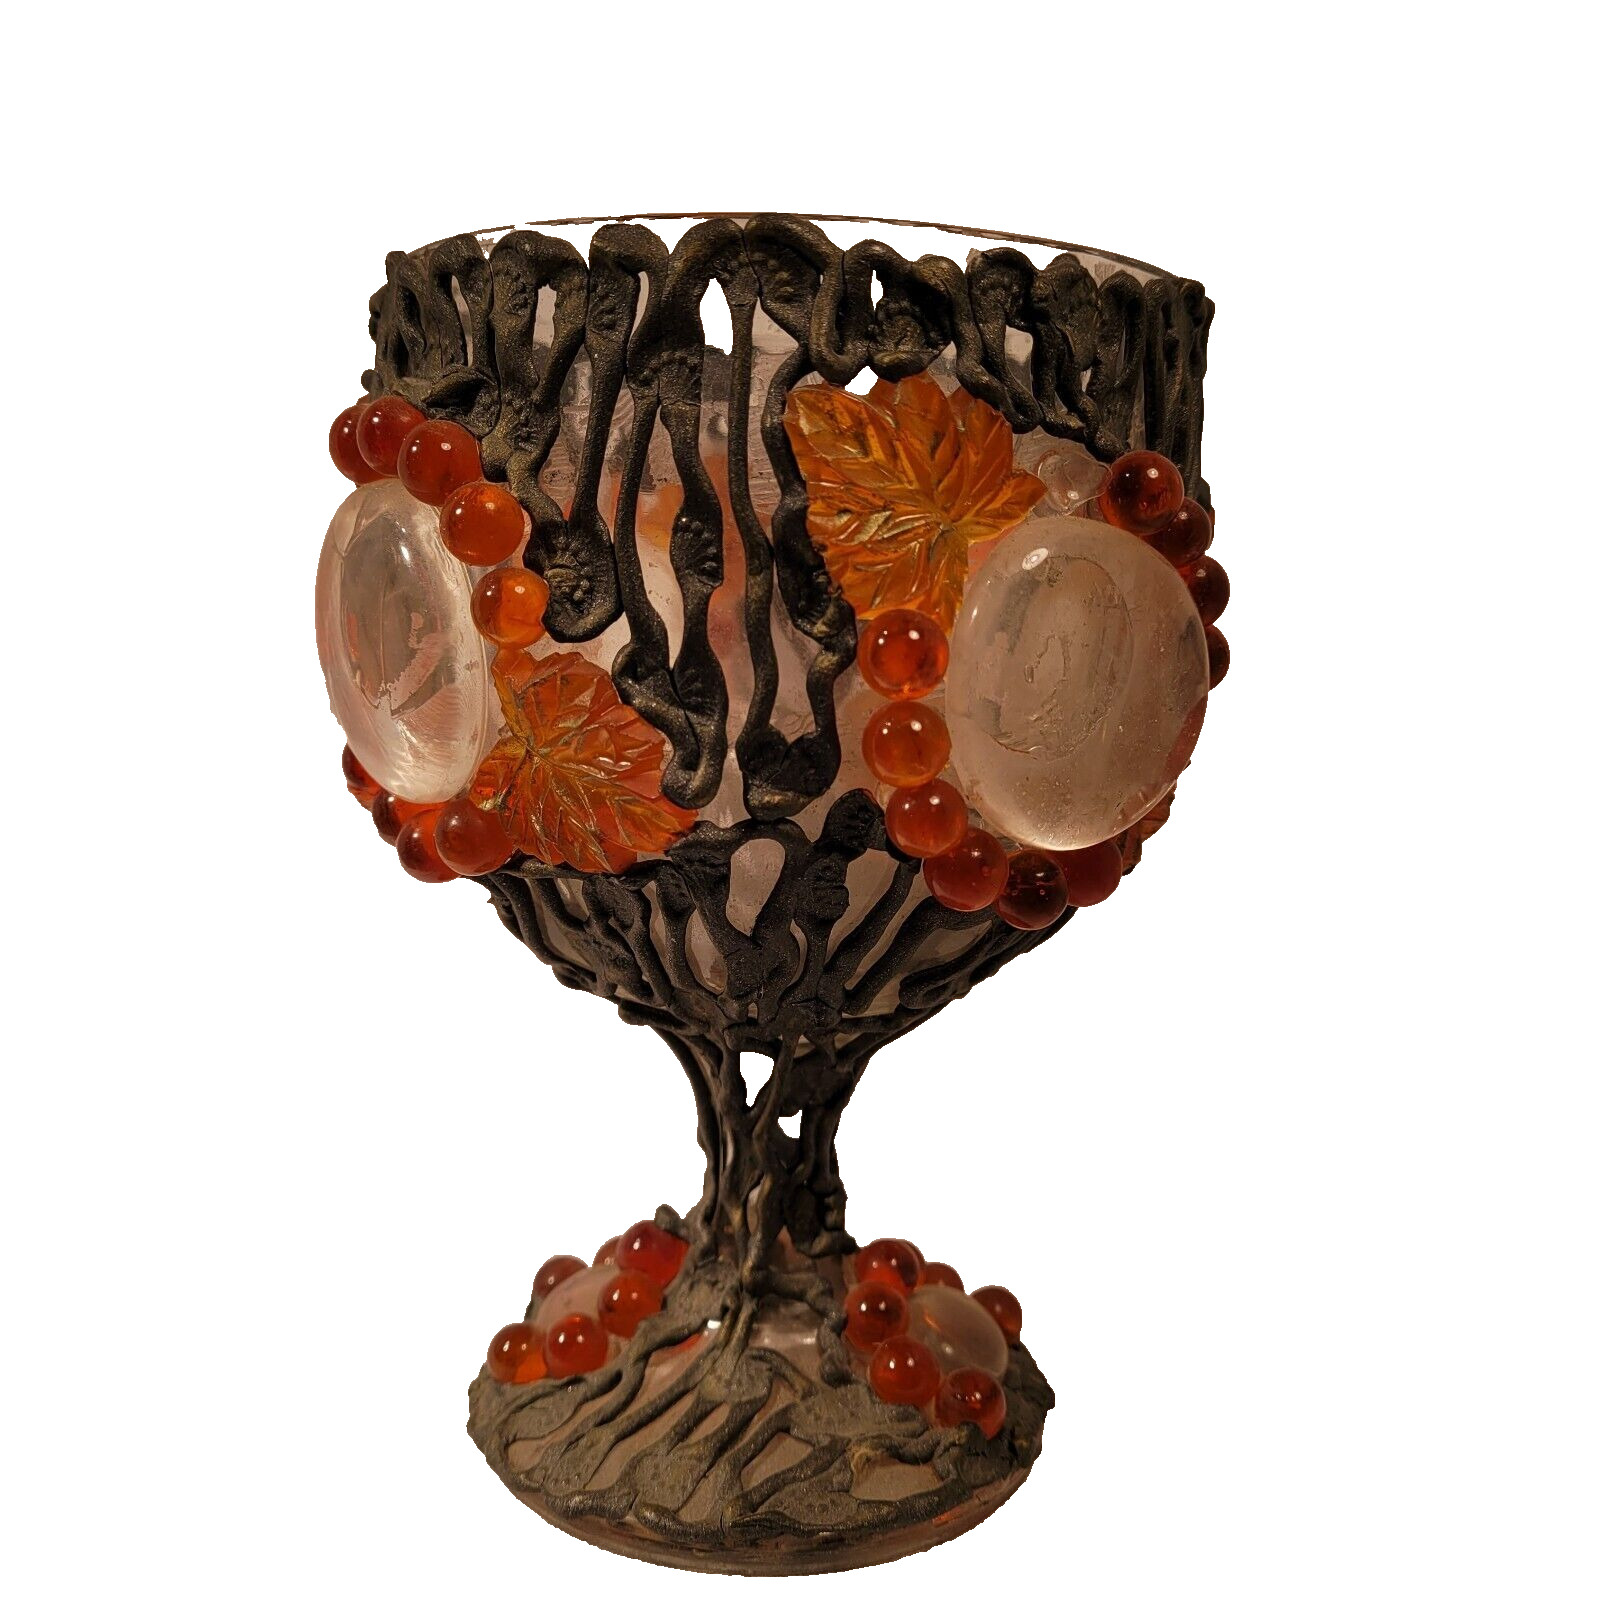 Ornate-19th Century Medieval Style Bejeweled Goblet Chalice